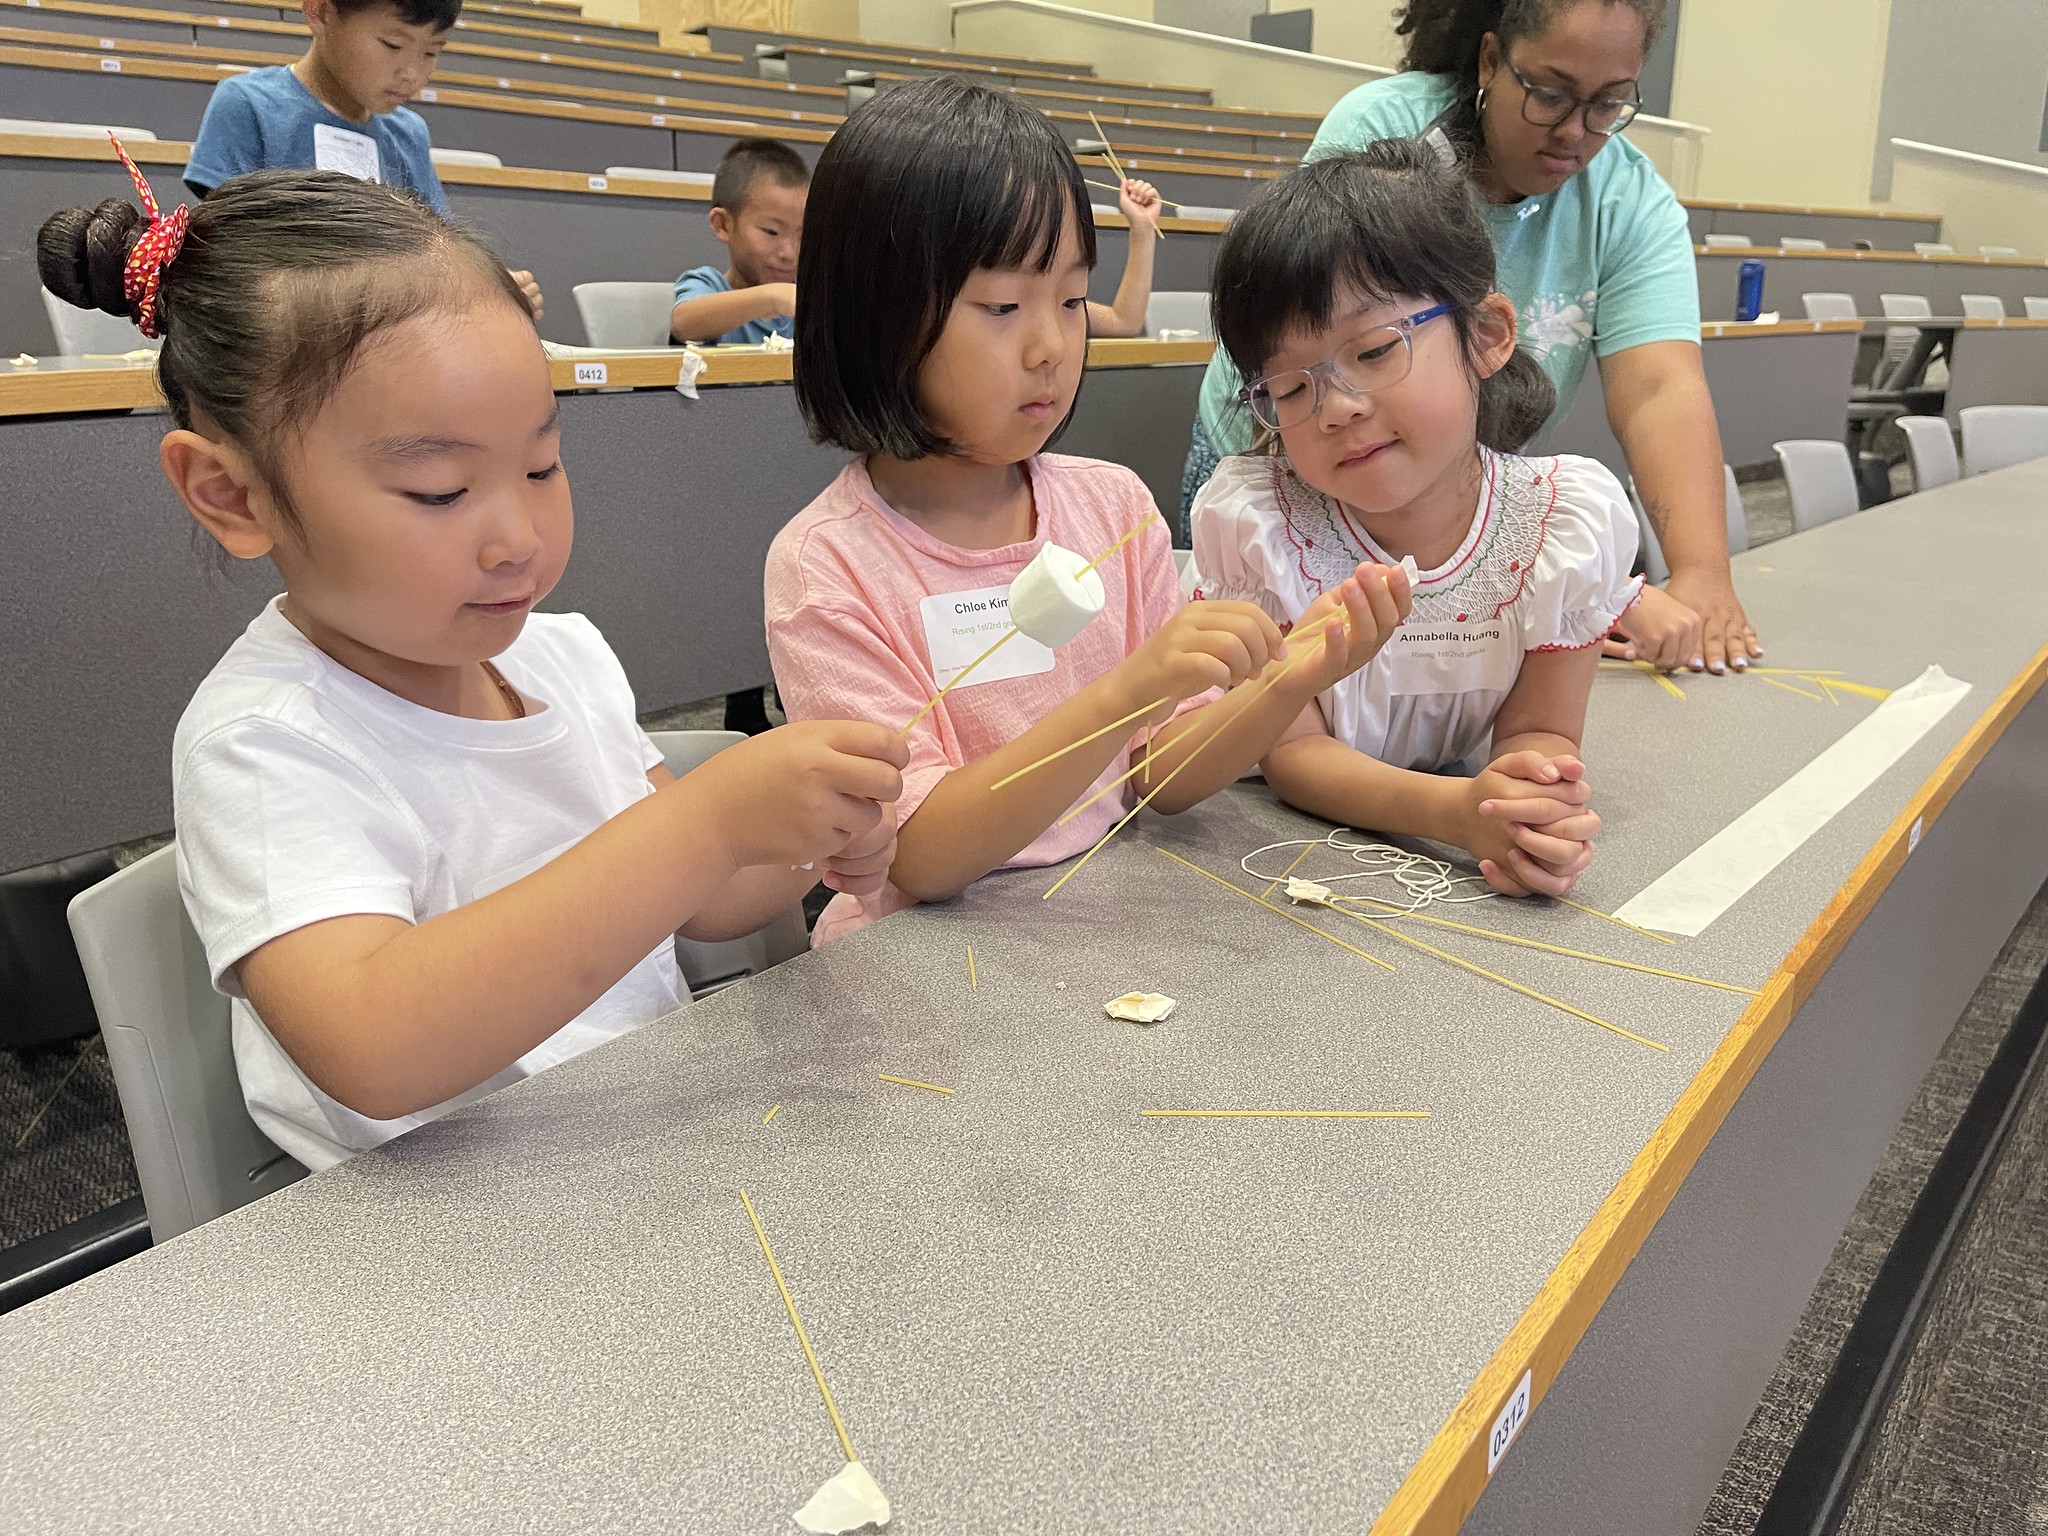 Science Matters participants compete to build the tallest pasta tower using the strength of triangles during math week.